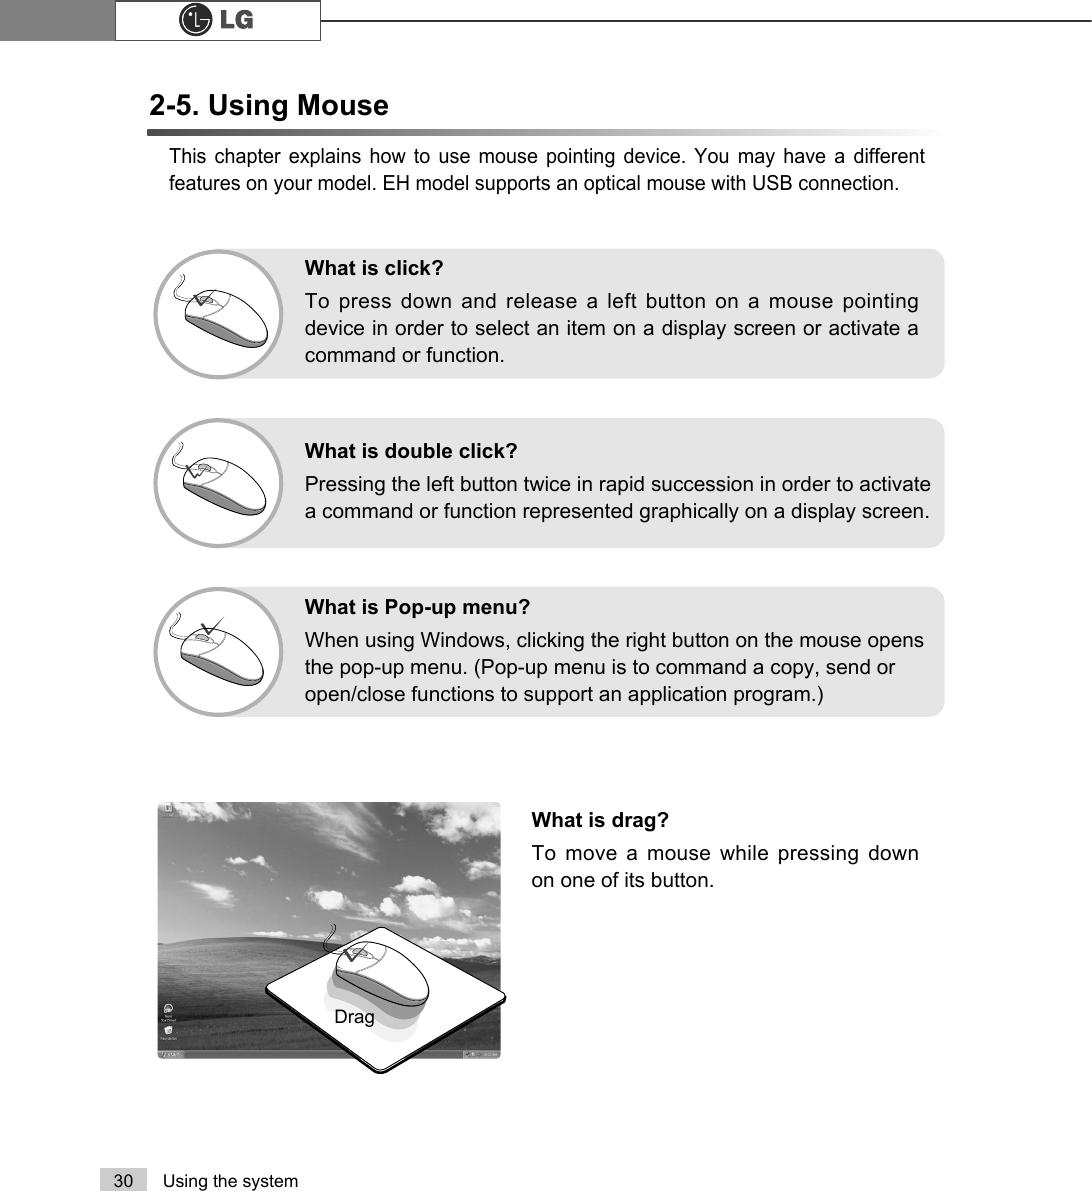 30 Using the systemThis chapter explains how to use mouse pointing device. You may have a differentfeatures on your model. EH model supports an optical mouse with USB connection.What is drag?To move a mouse while pressing downon one of its button.DragWhat is double click? Pressing the left button twice in rapid succession in order to activatea command or function represented graphically on a display screen.What is Pop-up menu? When using Windows, clicking the right button on the mouse opensthe pop-up menu. (Pop-up menu is to command a copy, send oropen/close functions to support an application program.)What is click?To press down and release a left button on a mouse pointingdevice in order to select an item on a display screen or activate acommand or function.2-5. Using Mouse